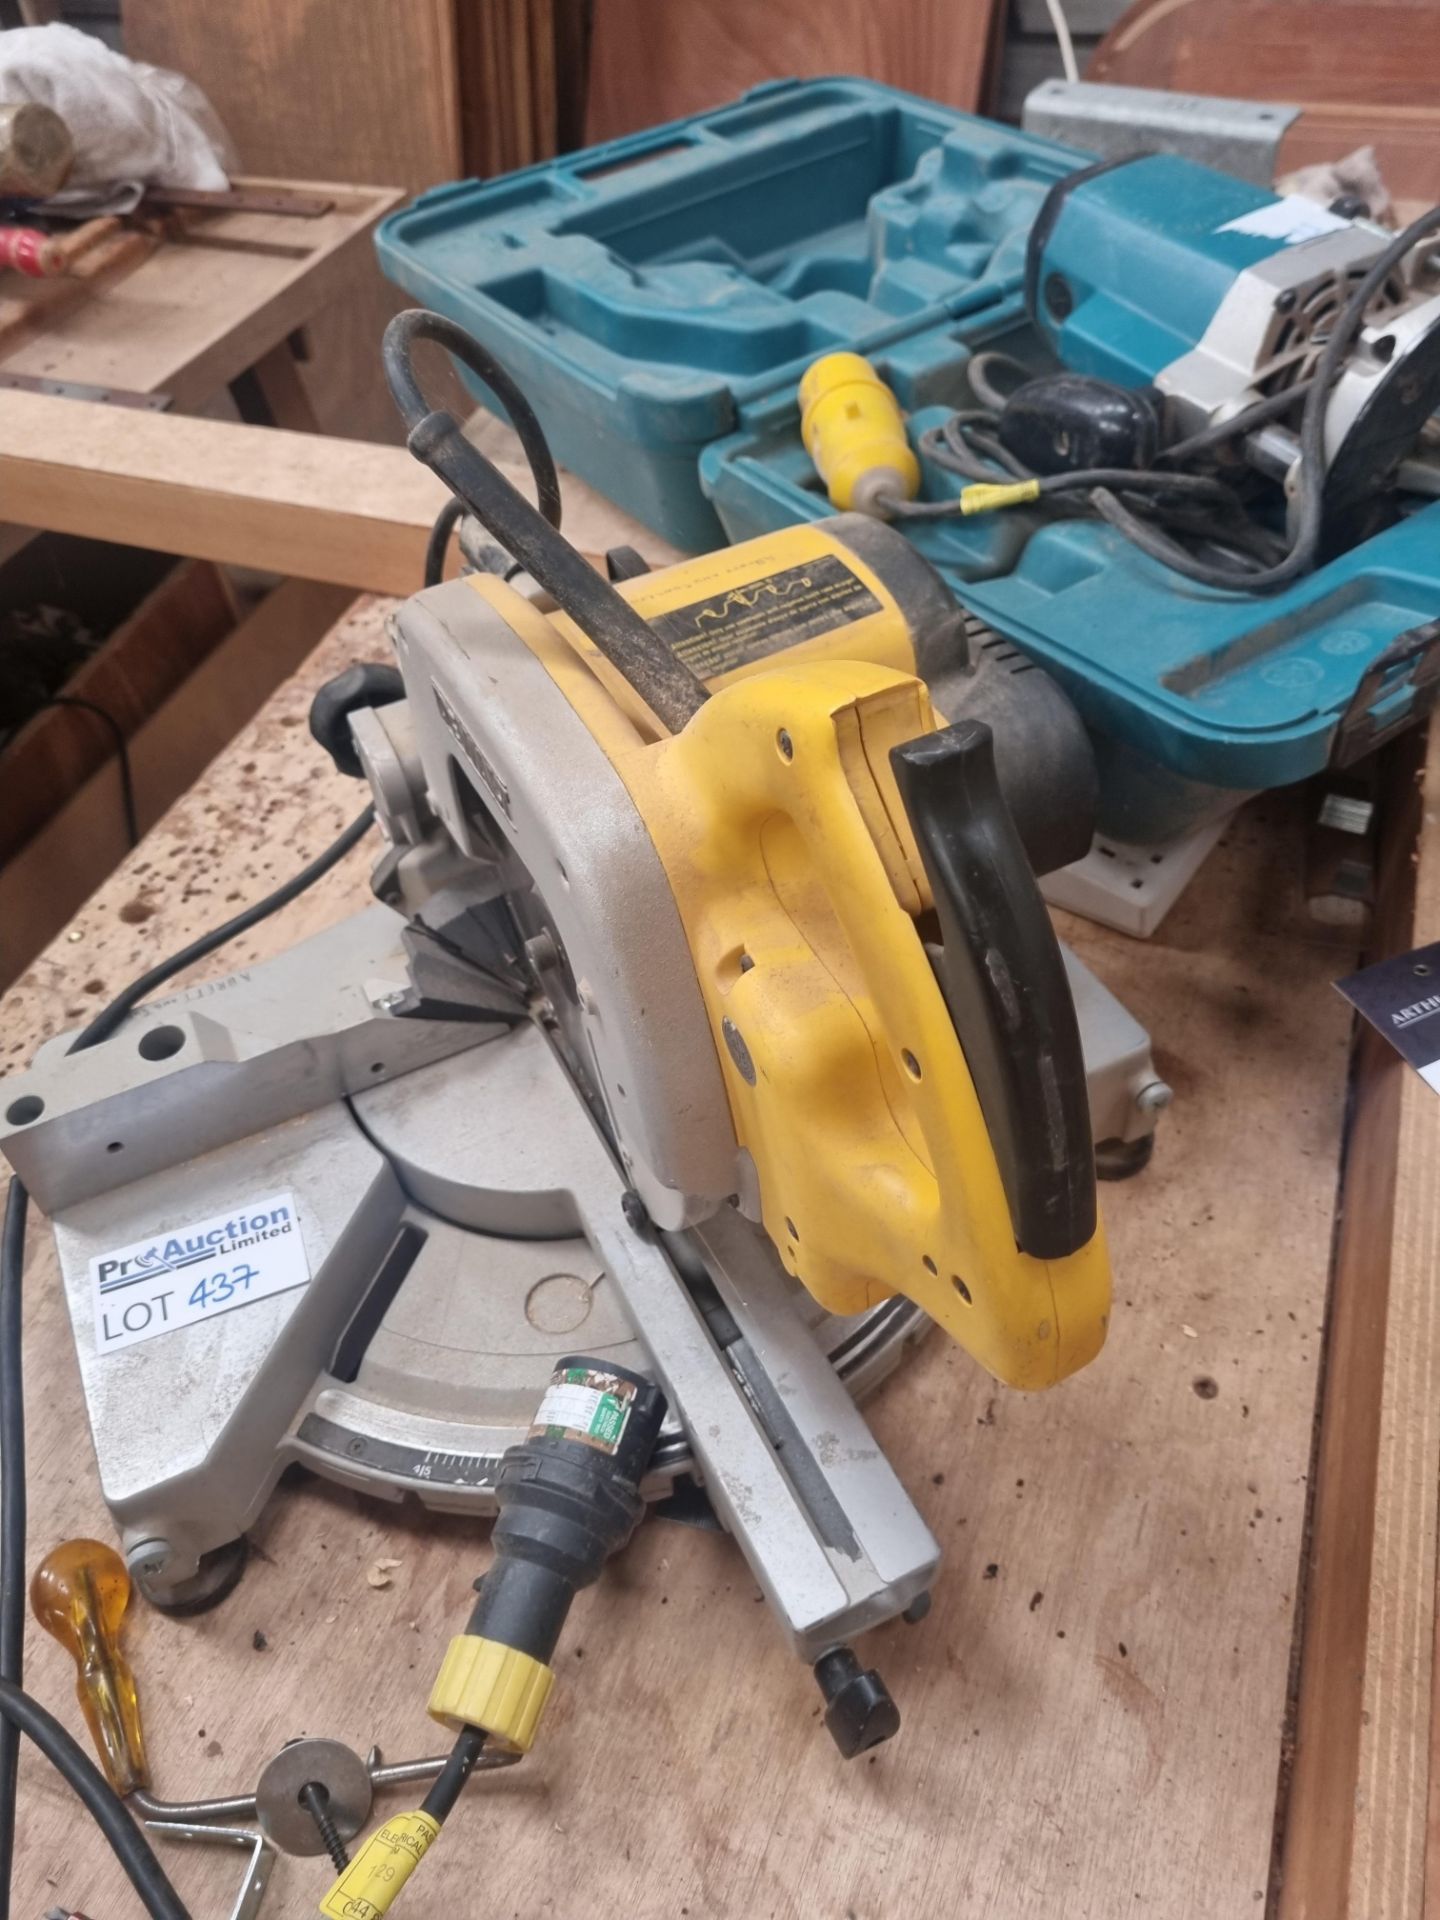 2 X Hand Tools Comprising Of; DEWALT DW700-L X MITRE Saw Type 1 & Makita Plunge Router 3612 X 110V - Image 3 of 3